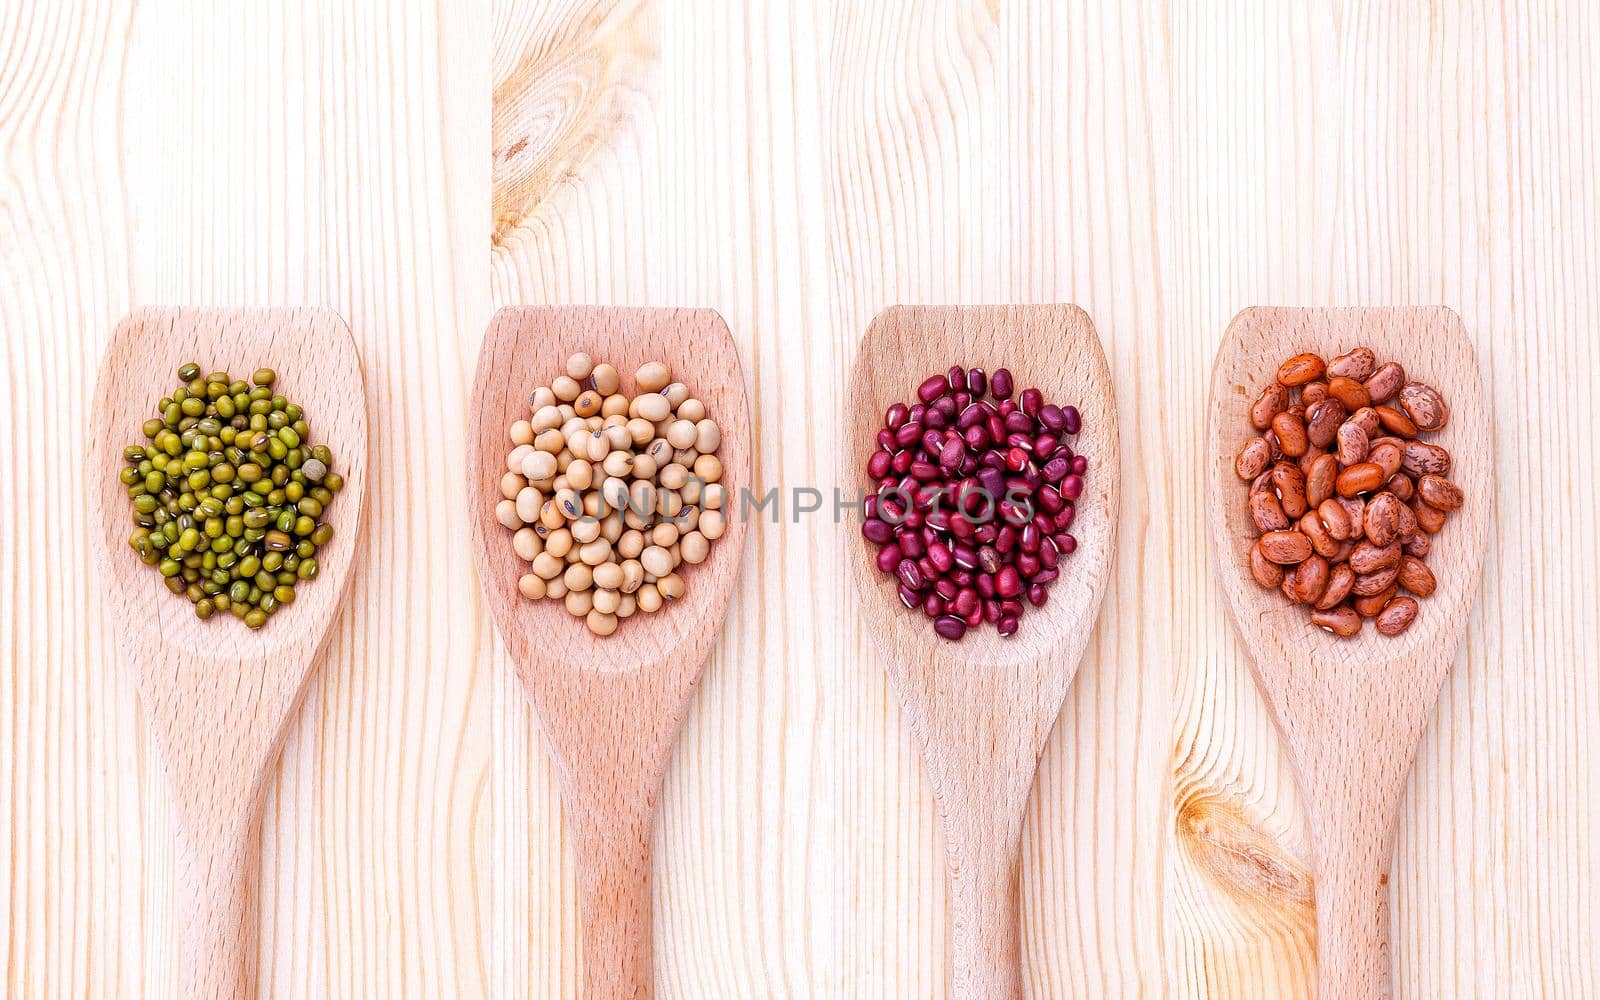 Assortment of beans and lentils in wooden spoon on wooden background.  soybean, mung bean , red bean and brown pinto beans . by kerdkanno